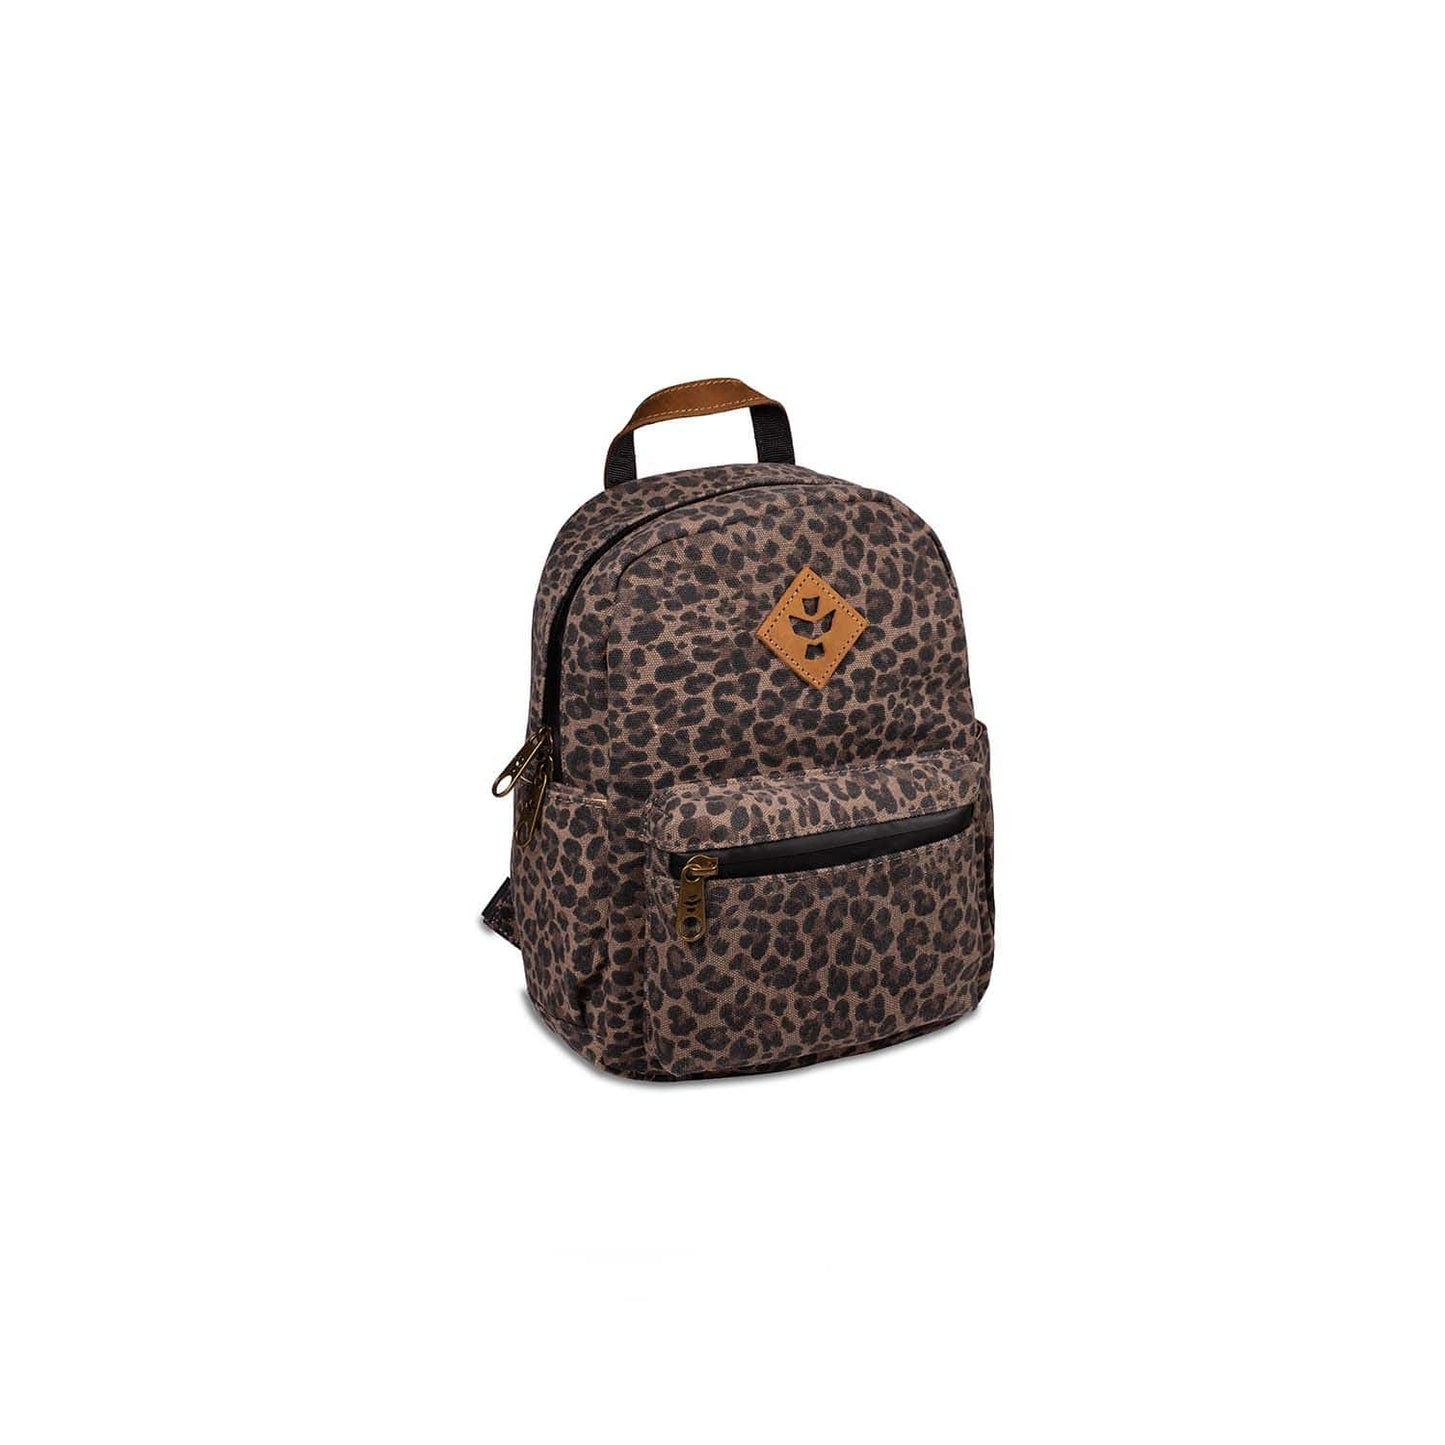 Revelry Supply Travel Bag Leopard The Shorty - Smell Proof Mini Backpack